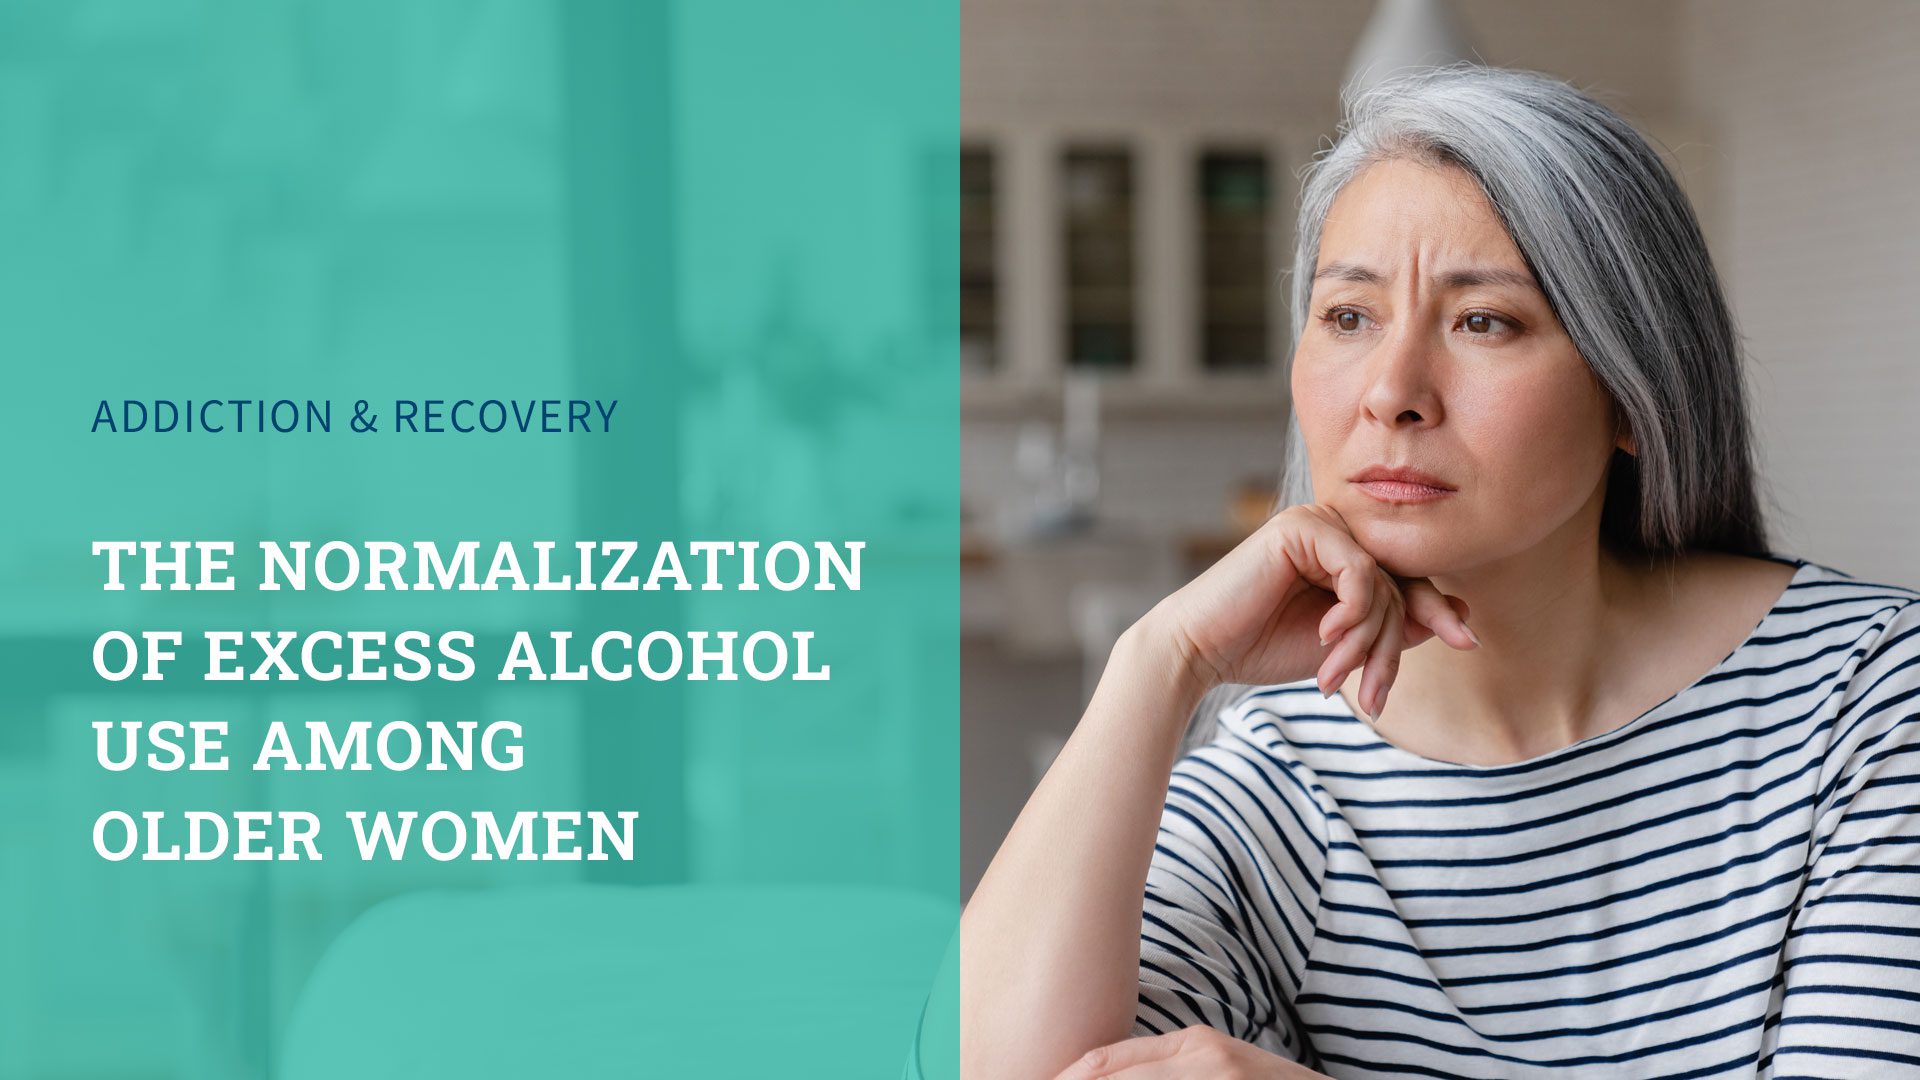 The Normalization of Excess Alcohol Use Among Older Women